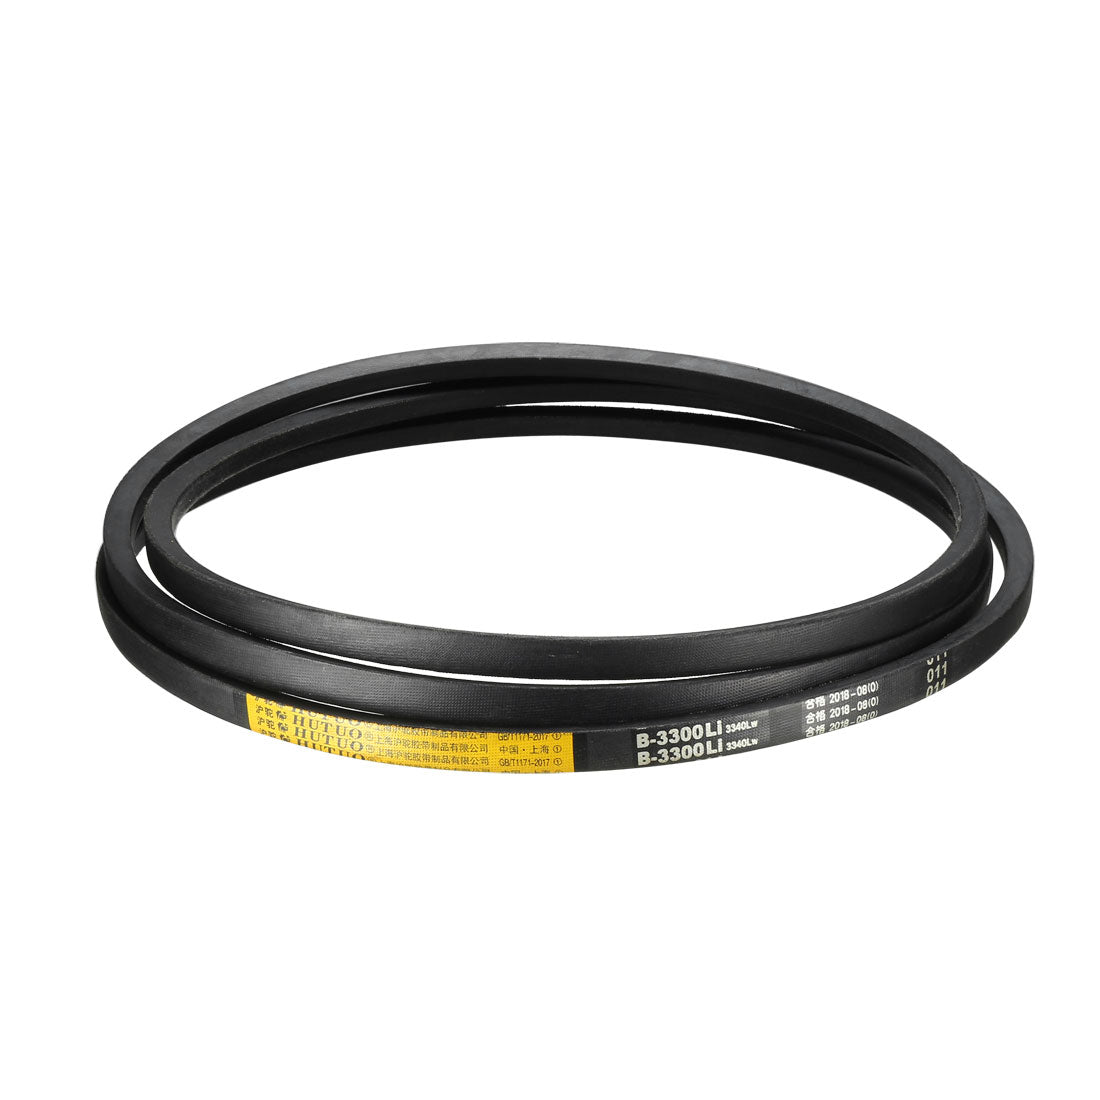 uxcell Uxcell B-130 V-Belts 130" Pitch Length, B-Section Rubber Drive Belt